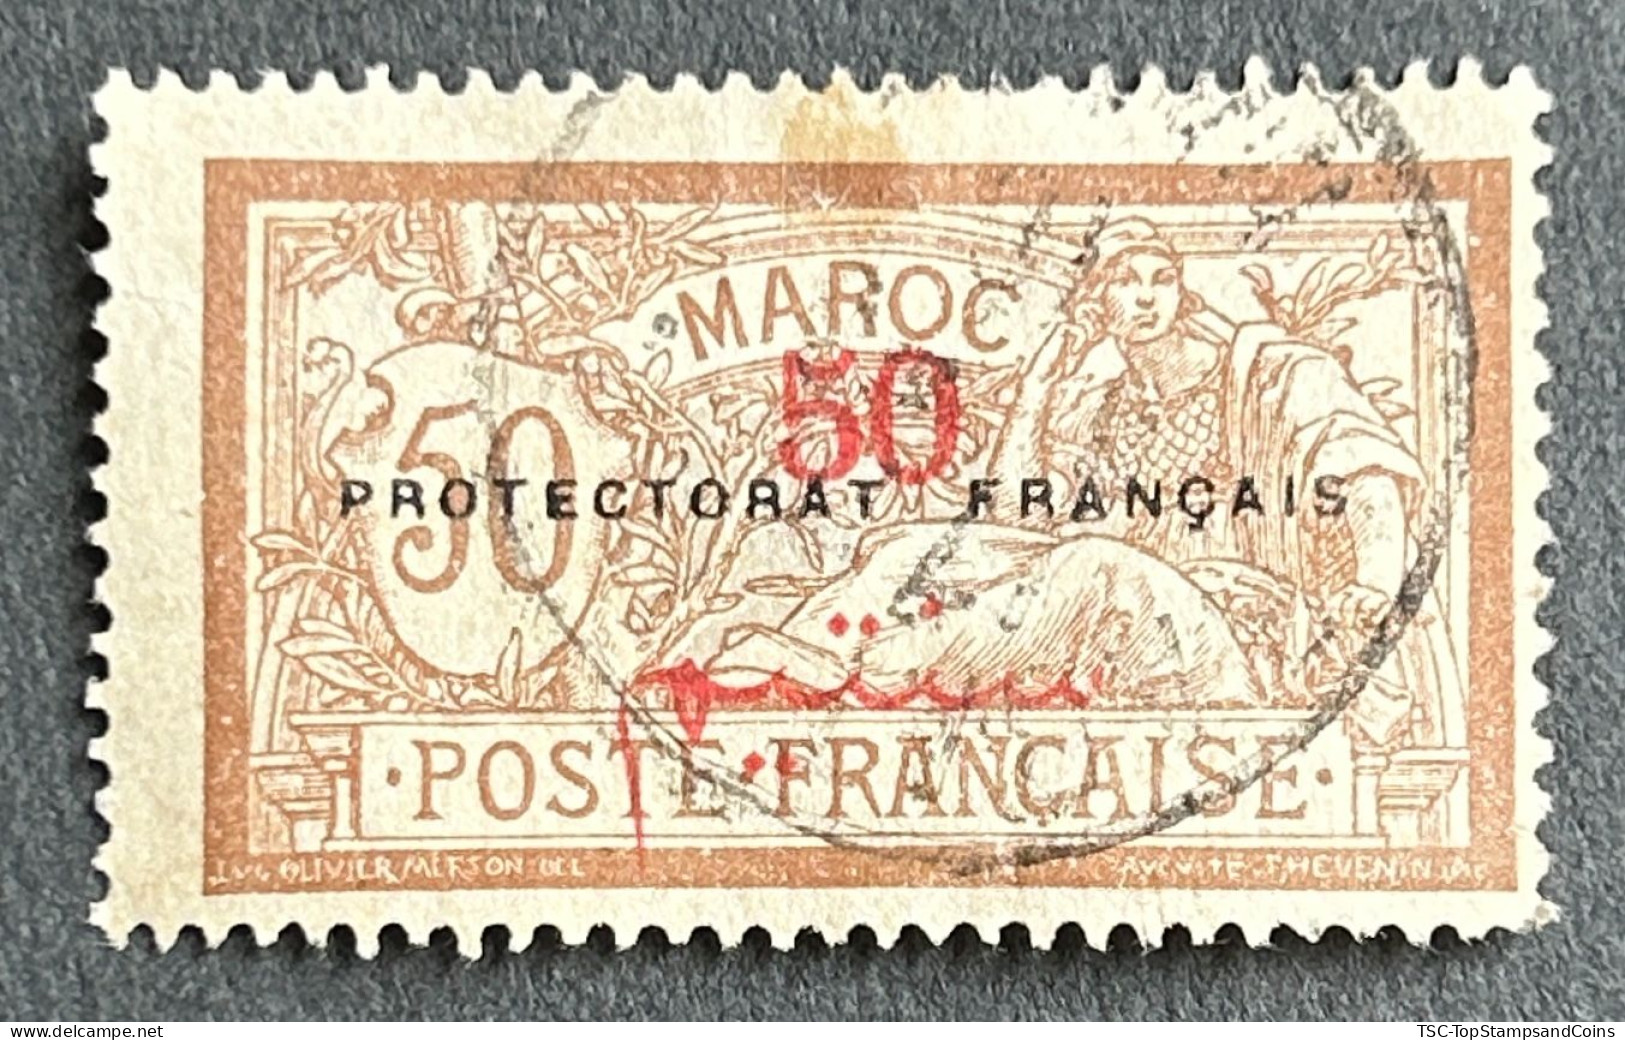 FRMA0050U1 - Type Merson Surcharged With Overprint "Protectorat Français" - 50 C Used Stamp - Morocco - 1914 - Used Stamps